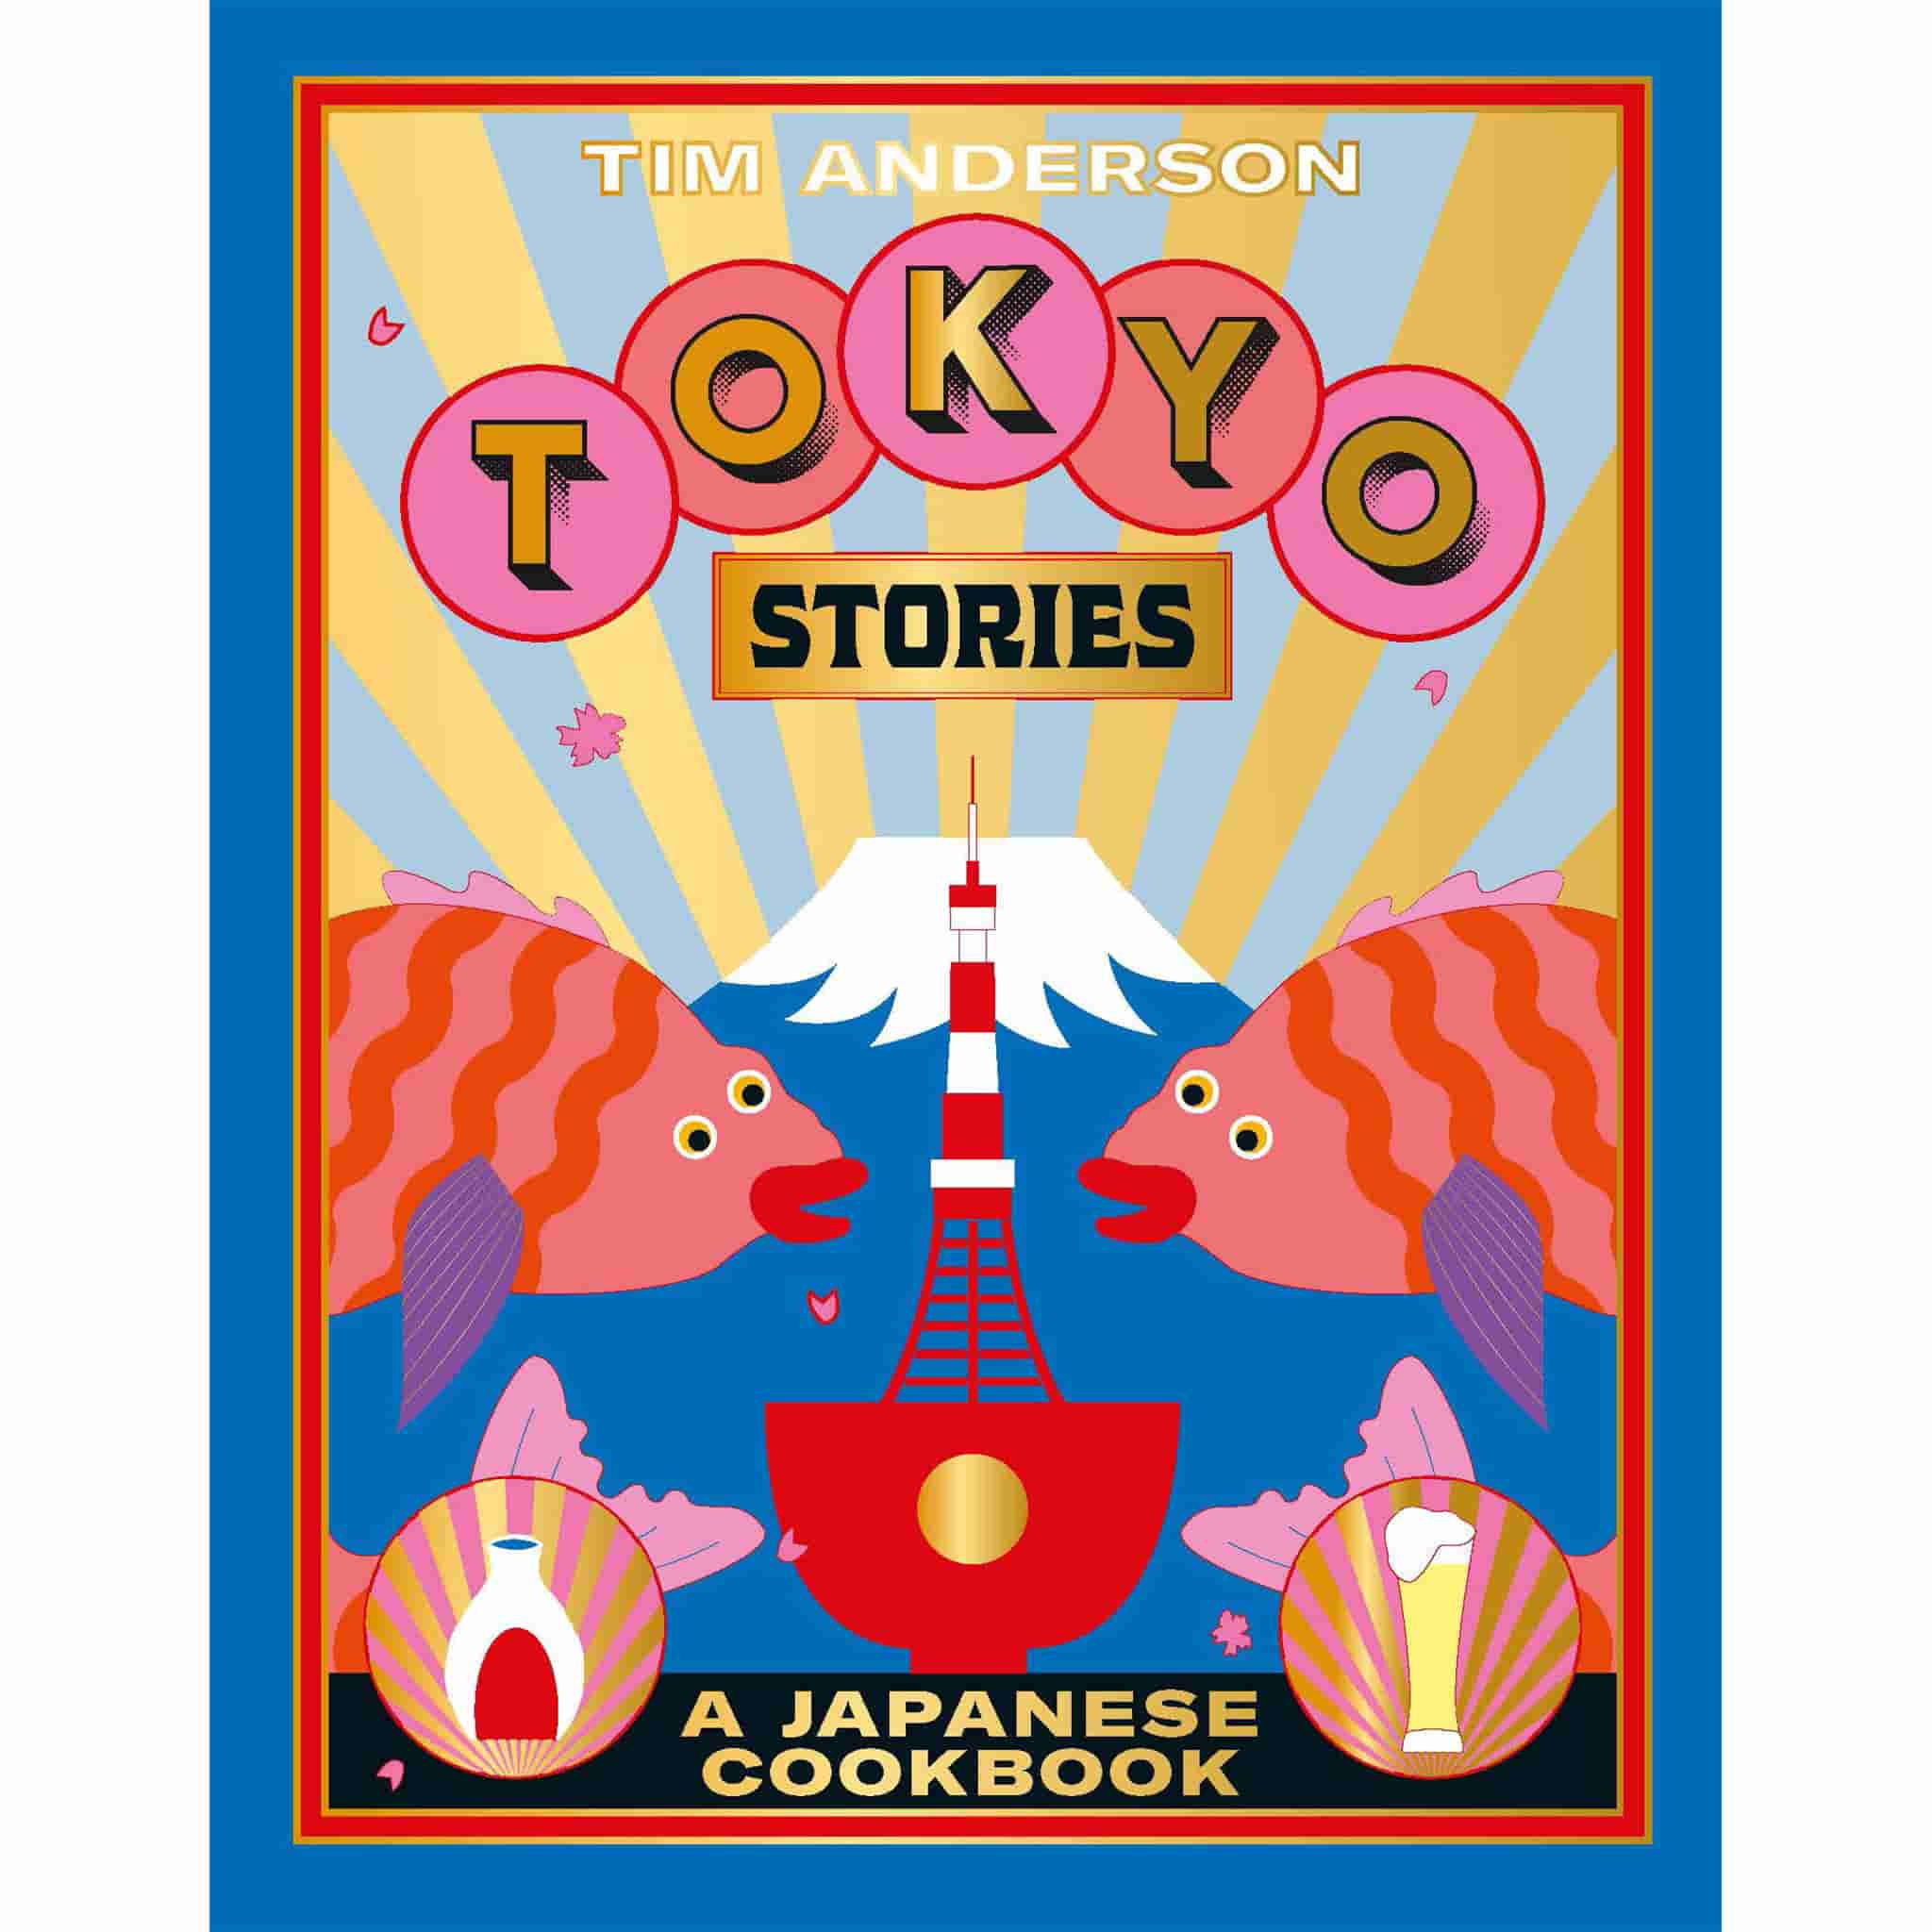 Tokyo Stories: A Japanese cookbook by Tim Anderson